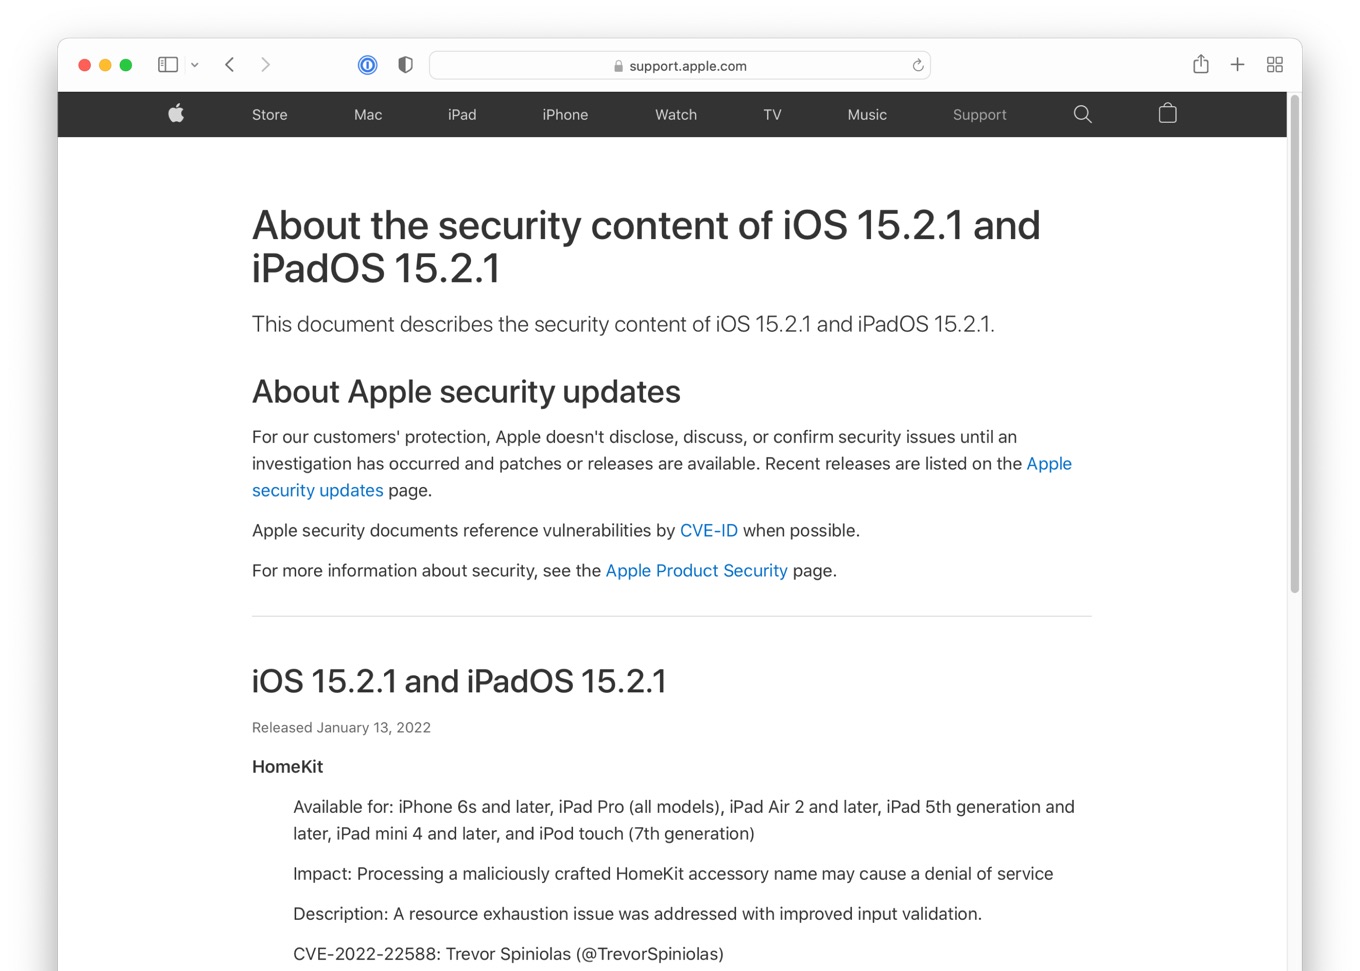 About the security content of iOS 15.2.1 and iPadOS 15.2.1